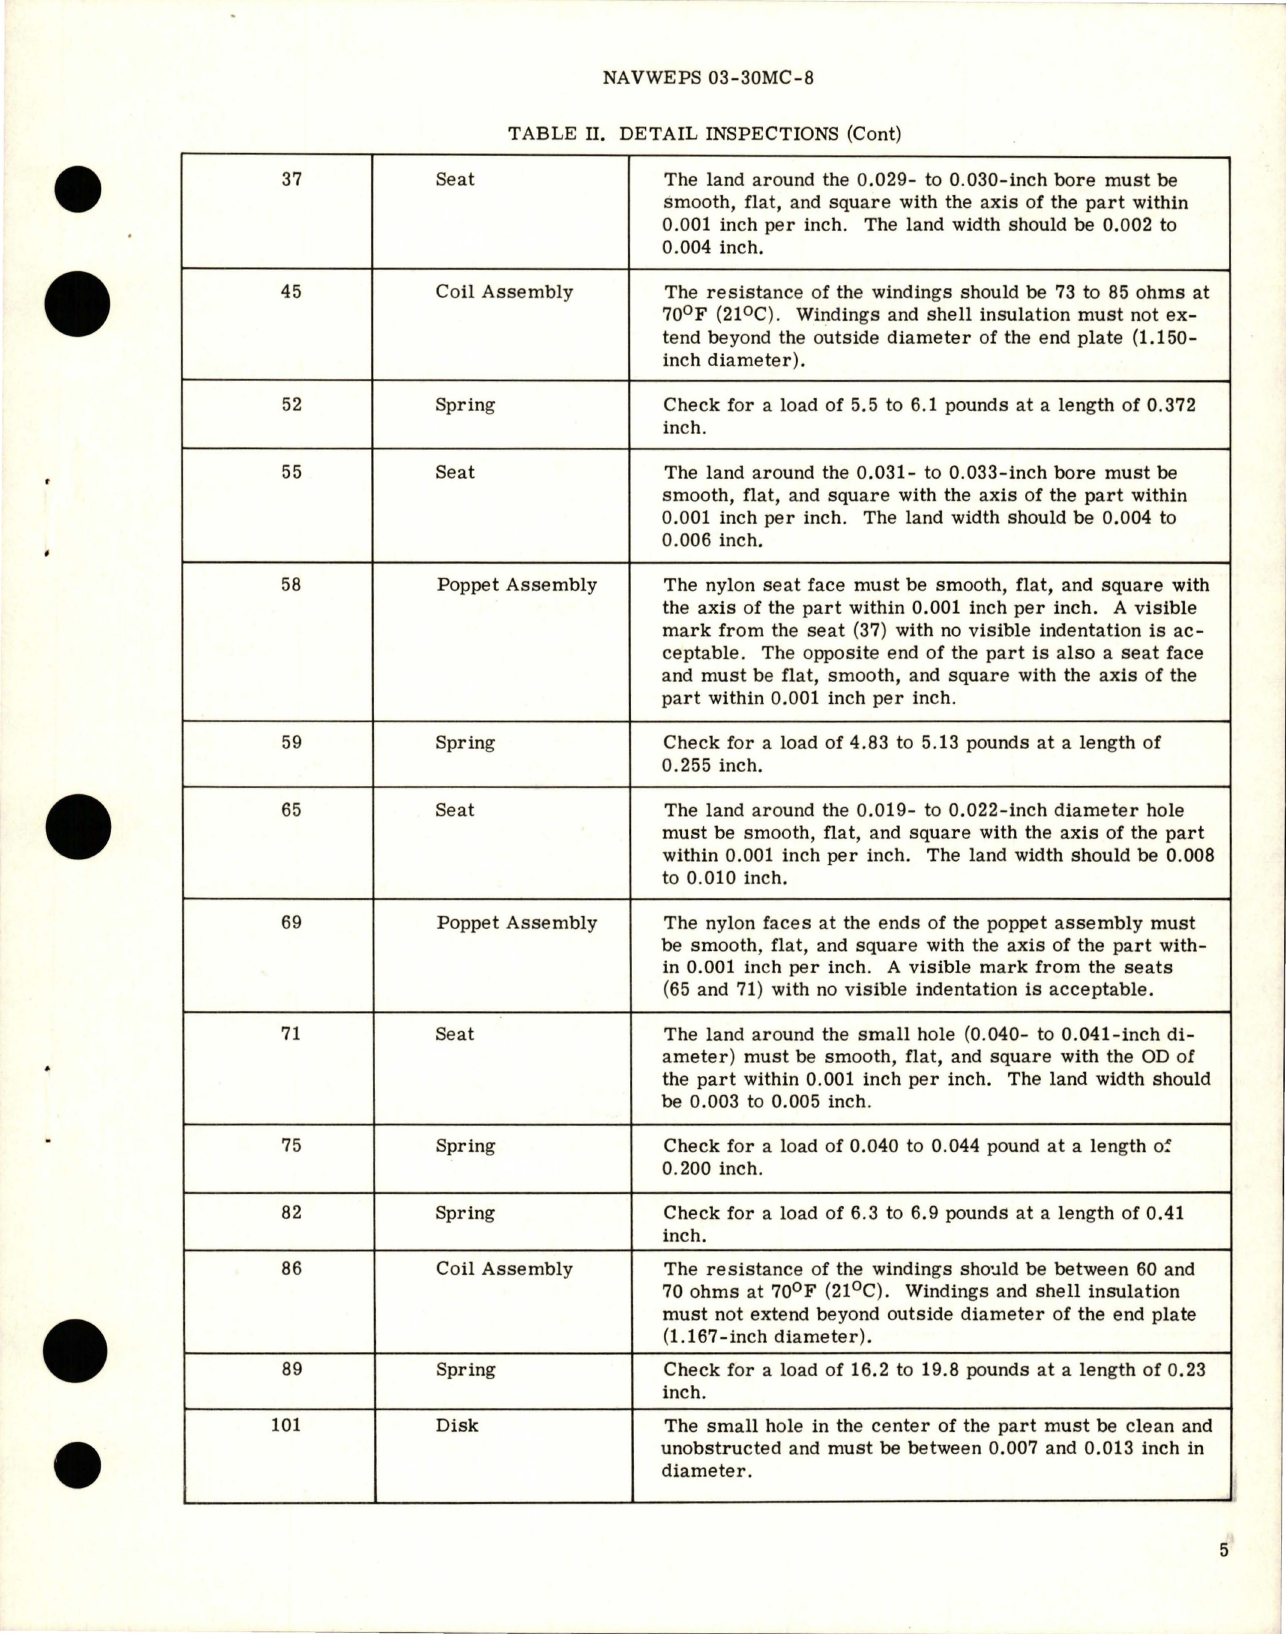 Sample page 7 from AirCorps Library document: Overhaul Instructions with Parts Breakdown for Control Valve - Part MC3637 